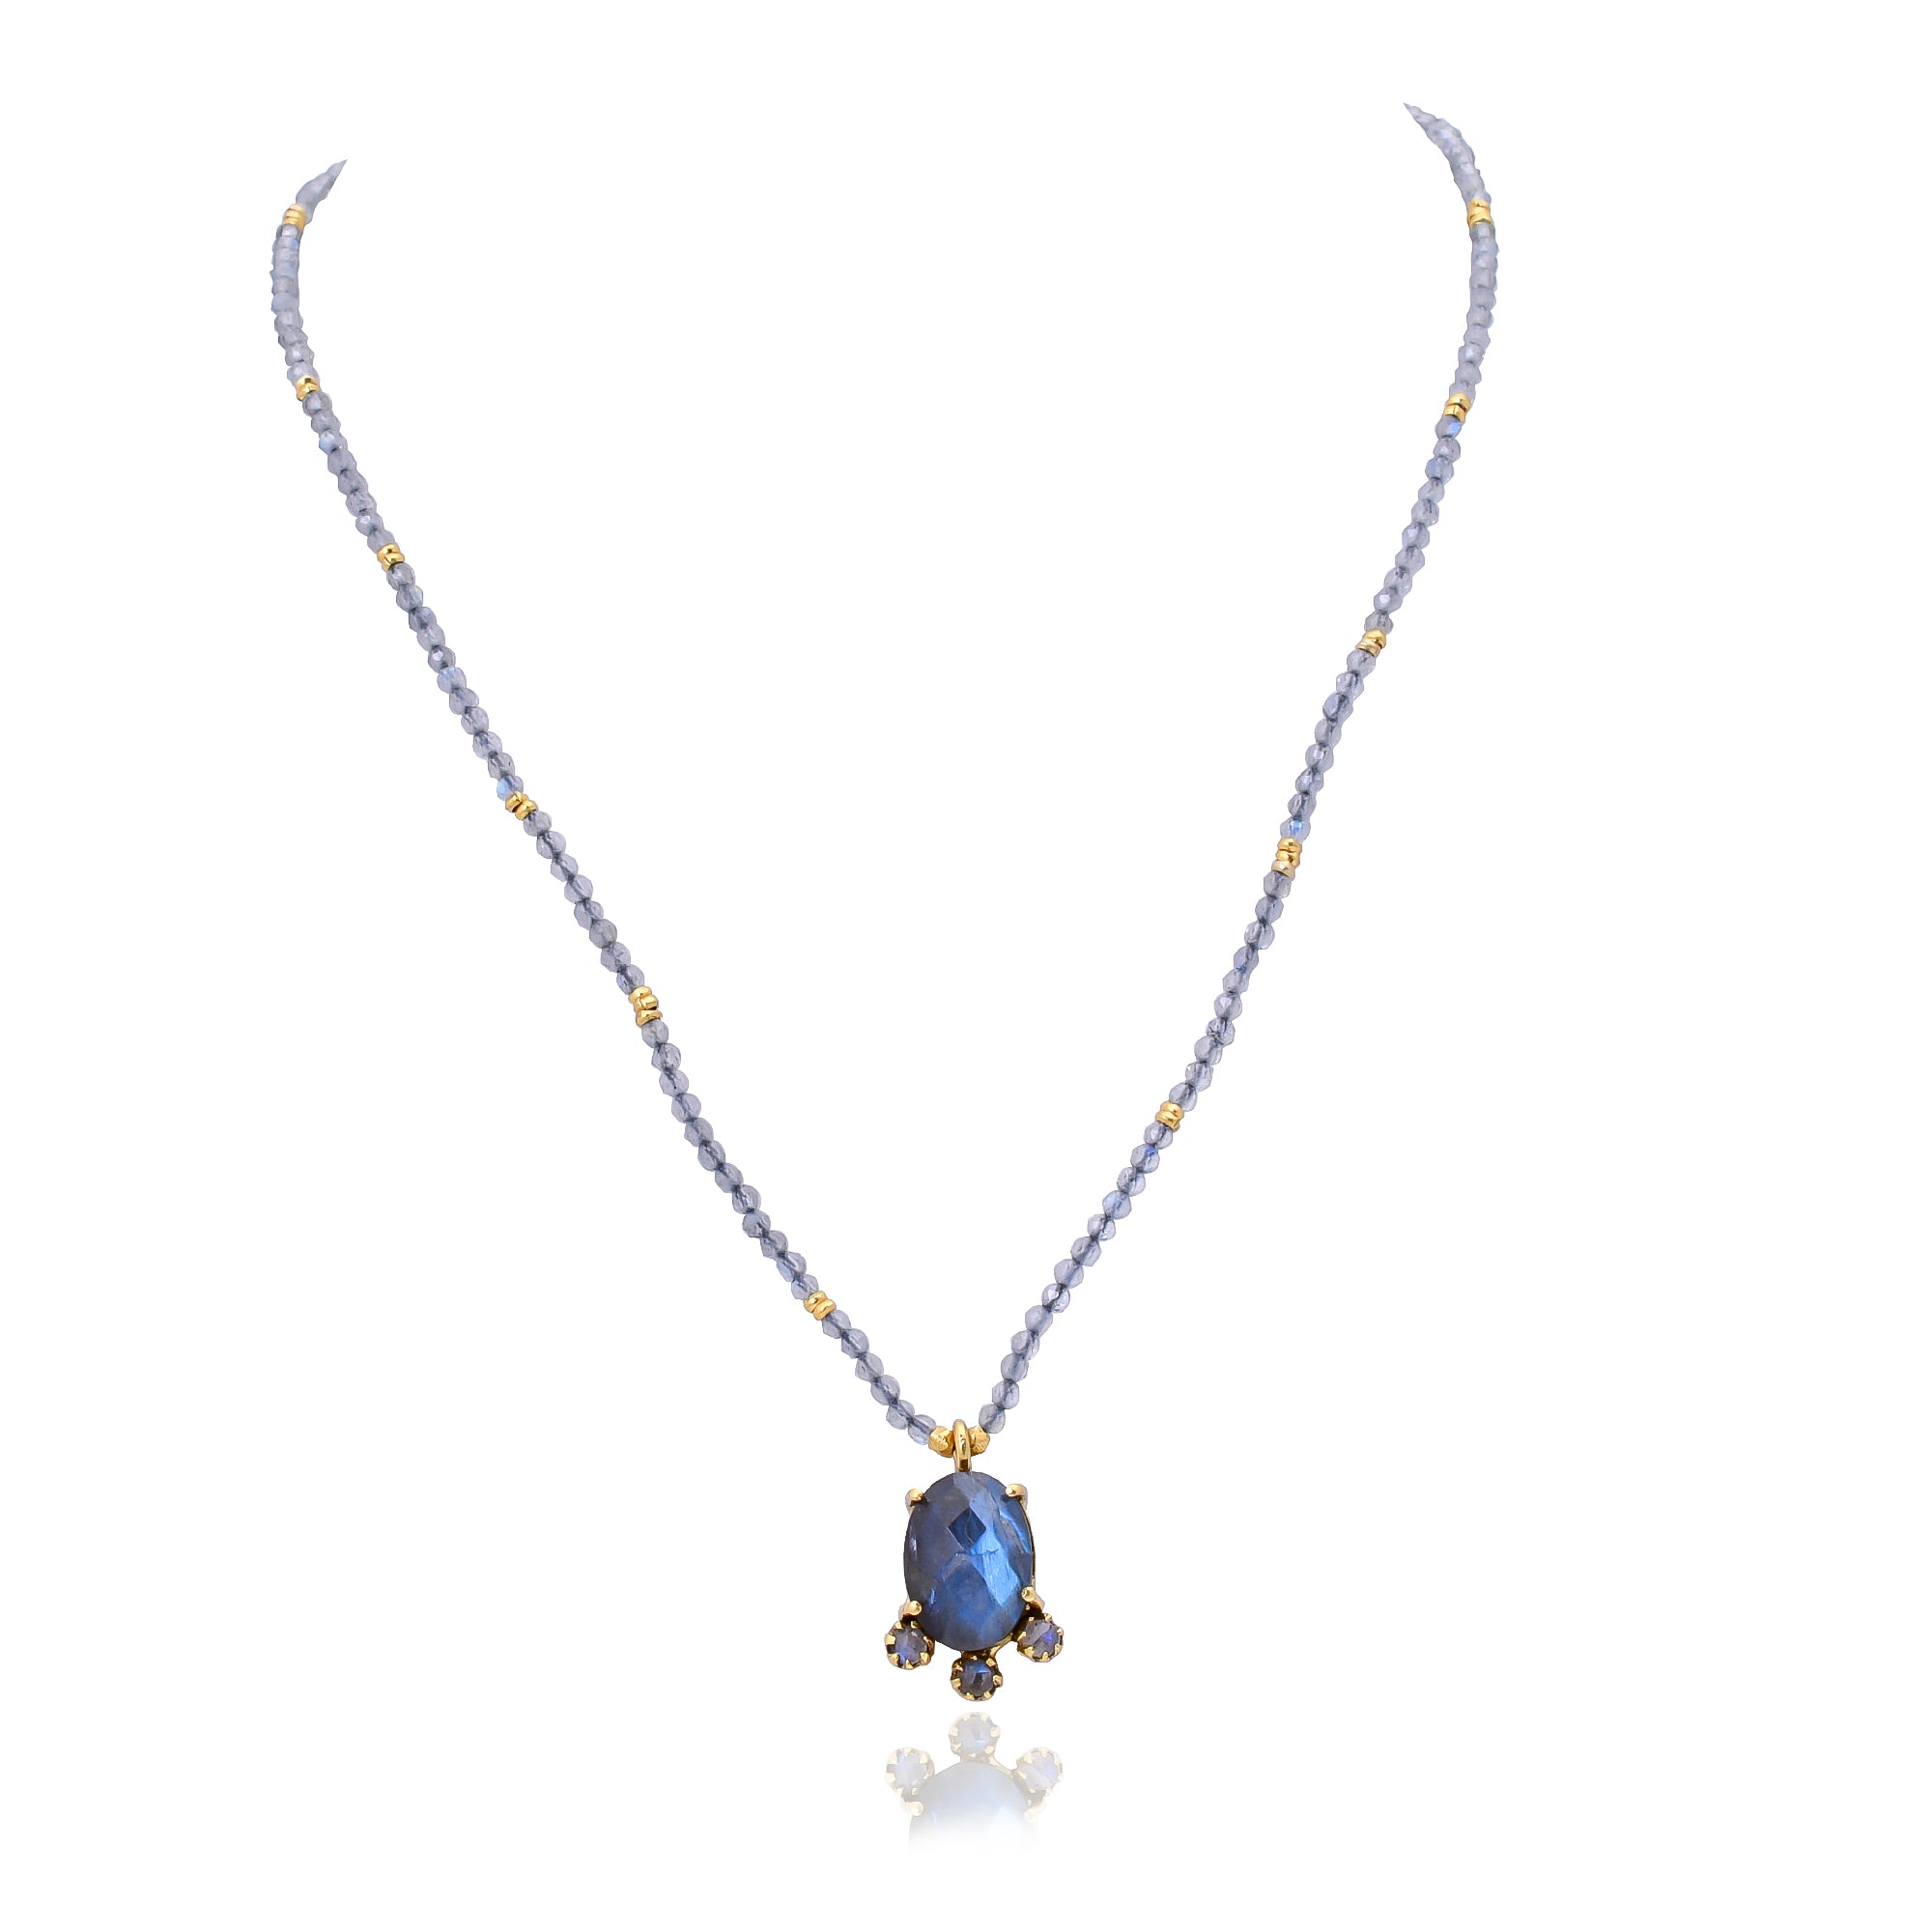 Silver Gold Plated Labradorite Necklace